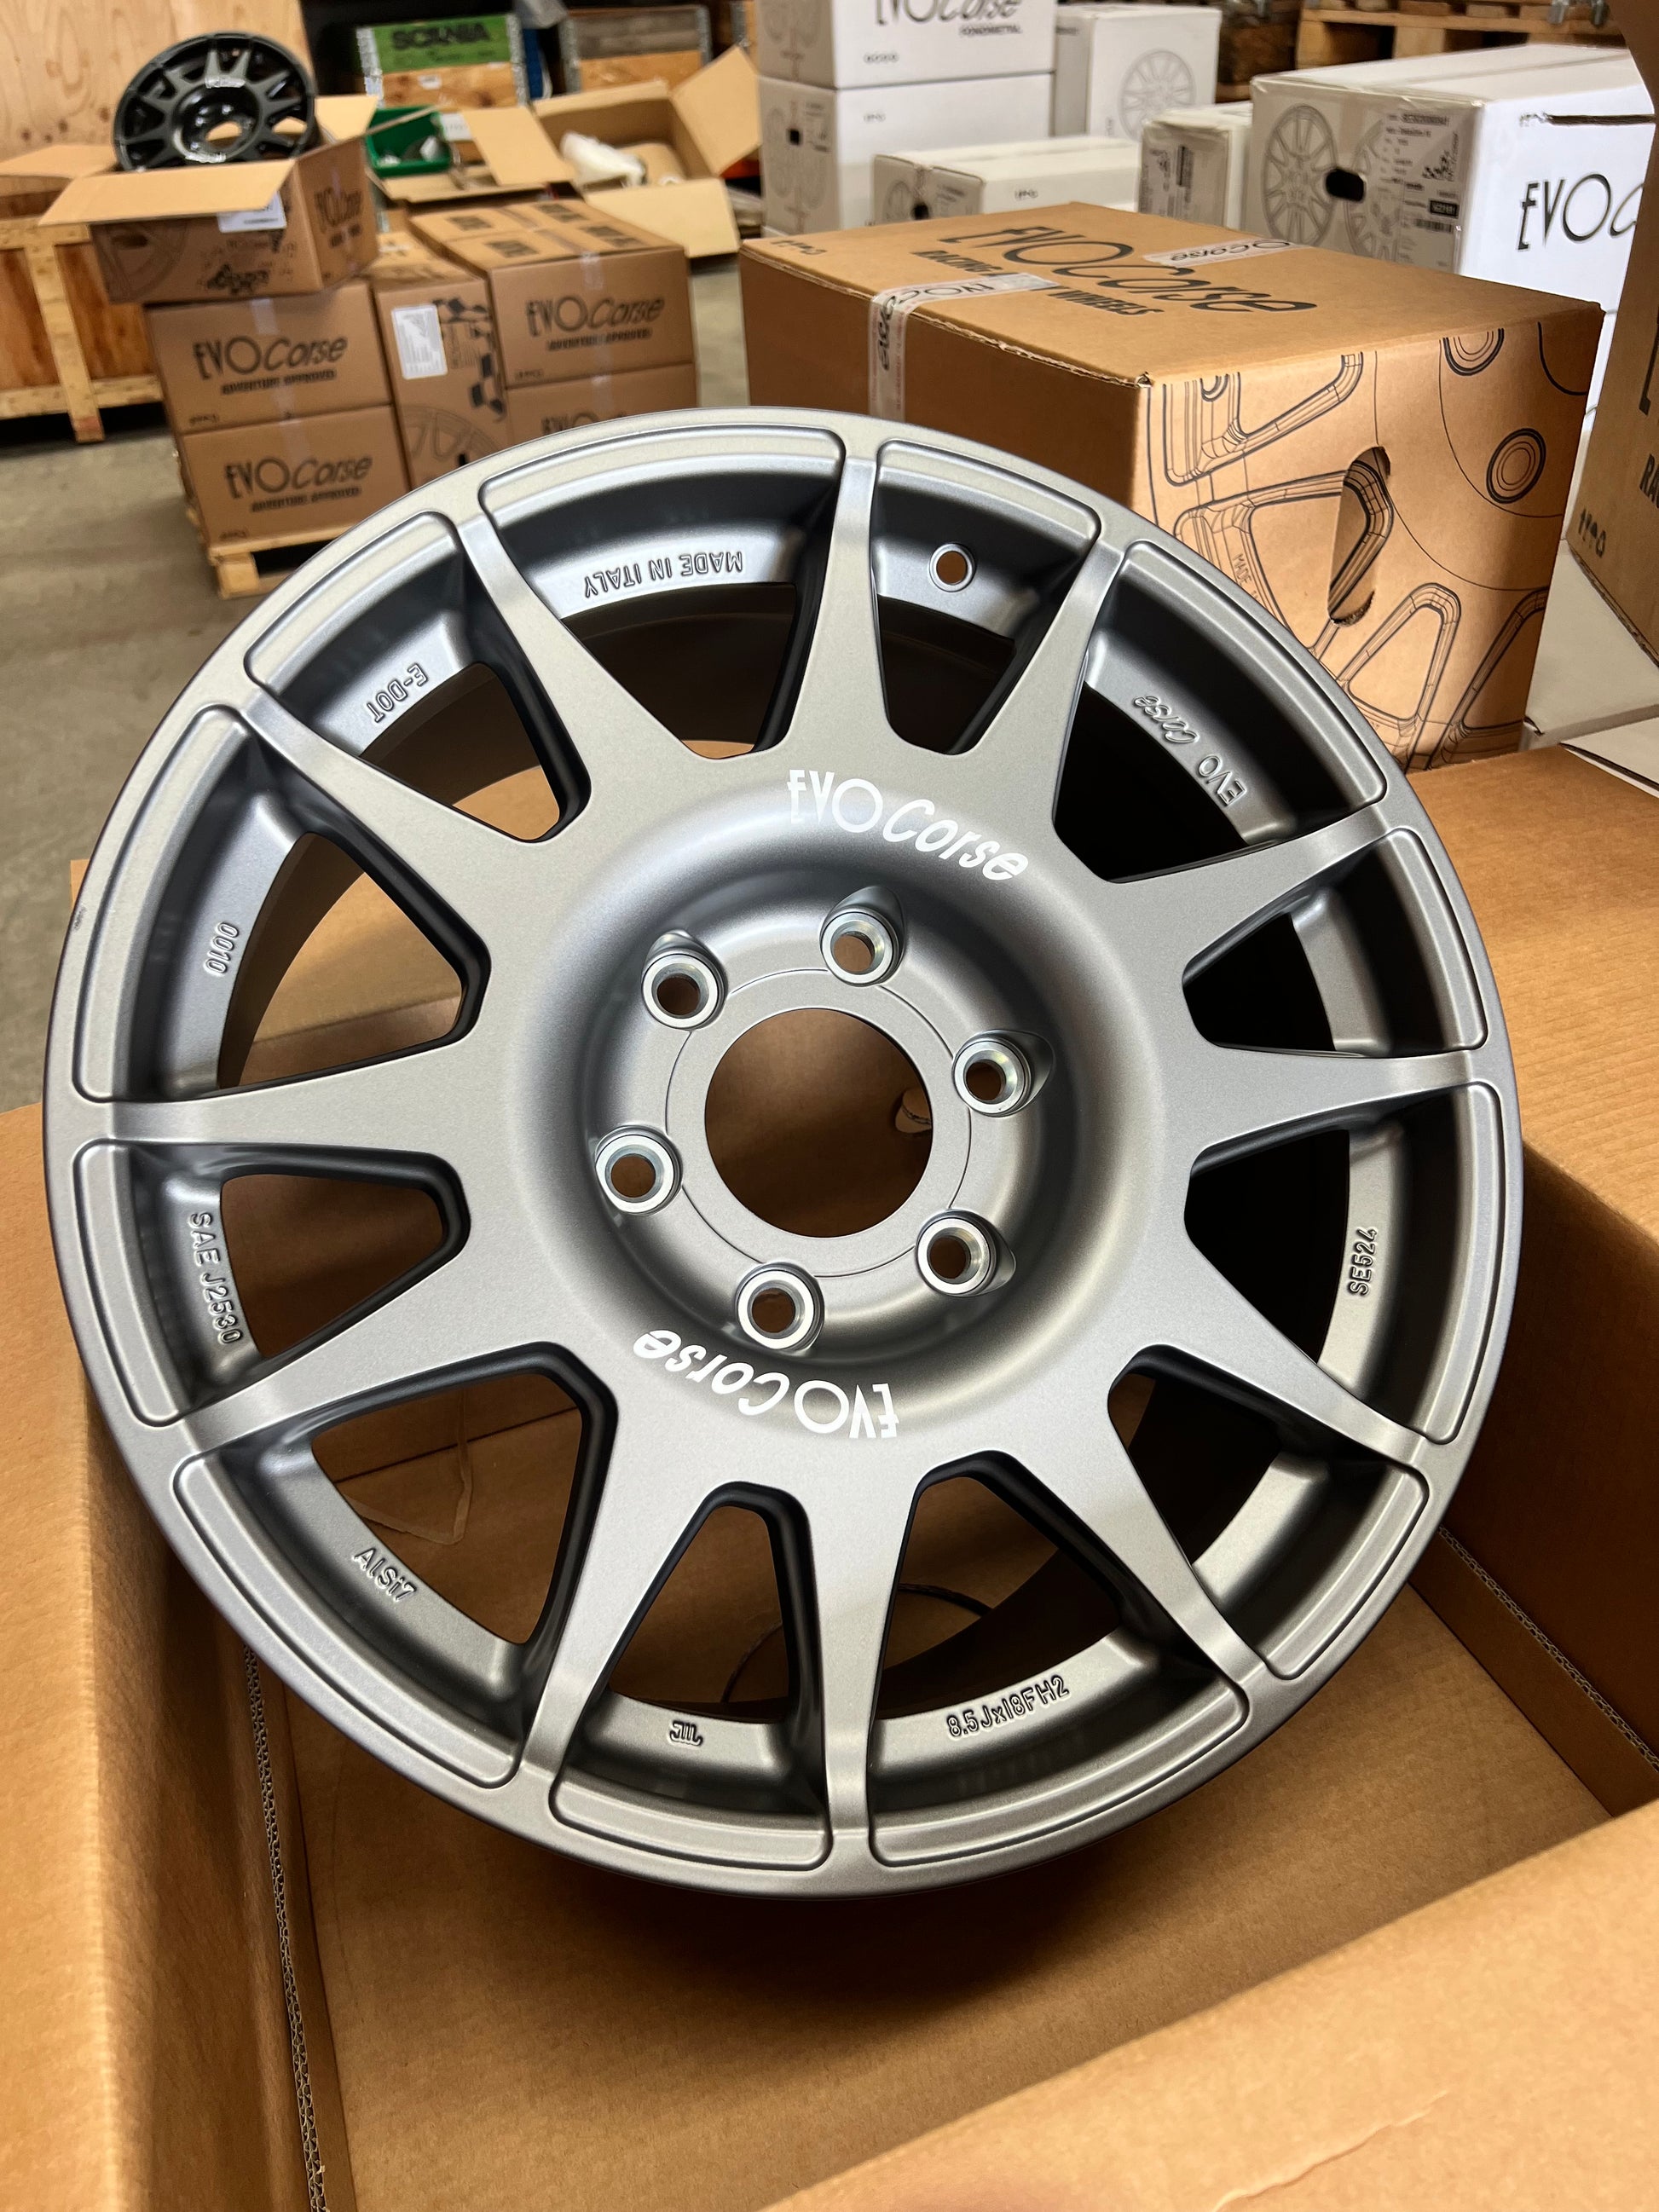 Ineos grenadier or J300 alloy wheel the offset that comes to the edge of the guard. Rally 18 x 8.5 with a positive 45 offset. Also, for land cruiser 300 series, with a 47 offset. Best wheel for all terrain tyres. Like BFGoodrich of Falken 275 65 r18. High strength for GVM upgrade. Evo Corse, made in Italy. Pictured here in box from Overlanders, Matt anthracite colour.